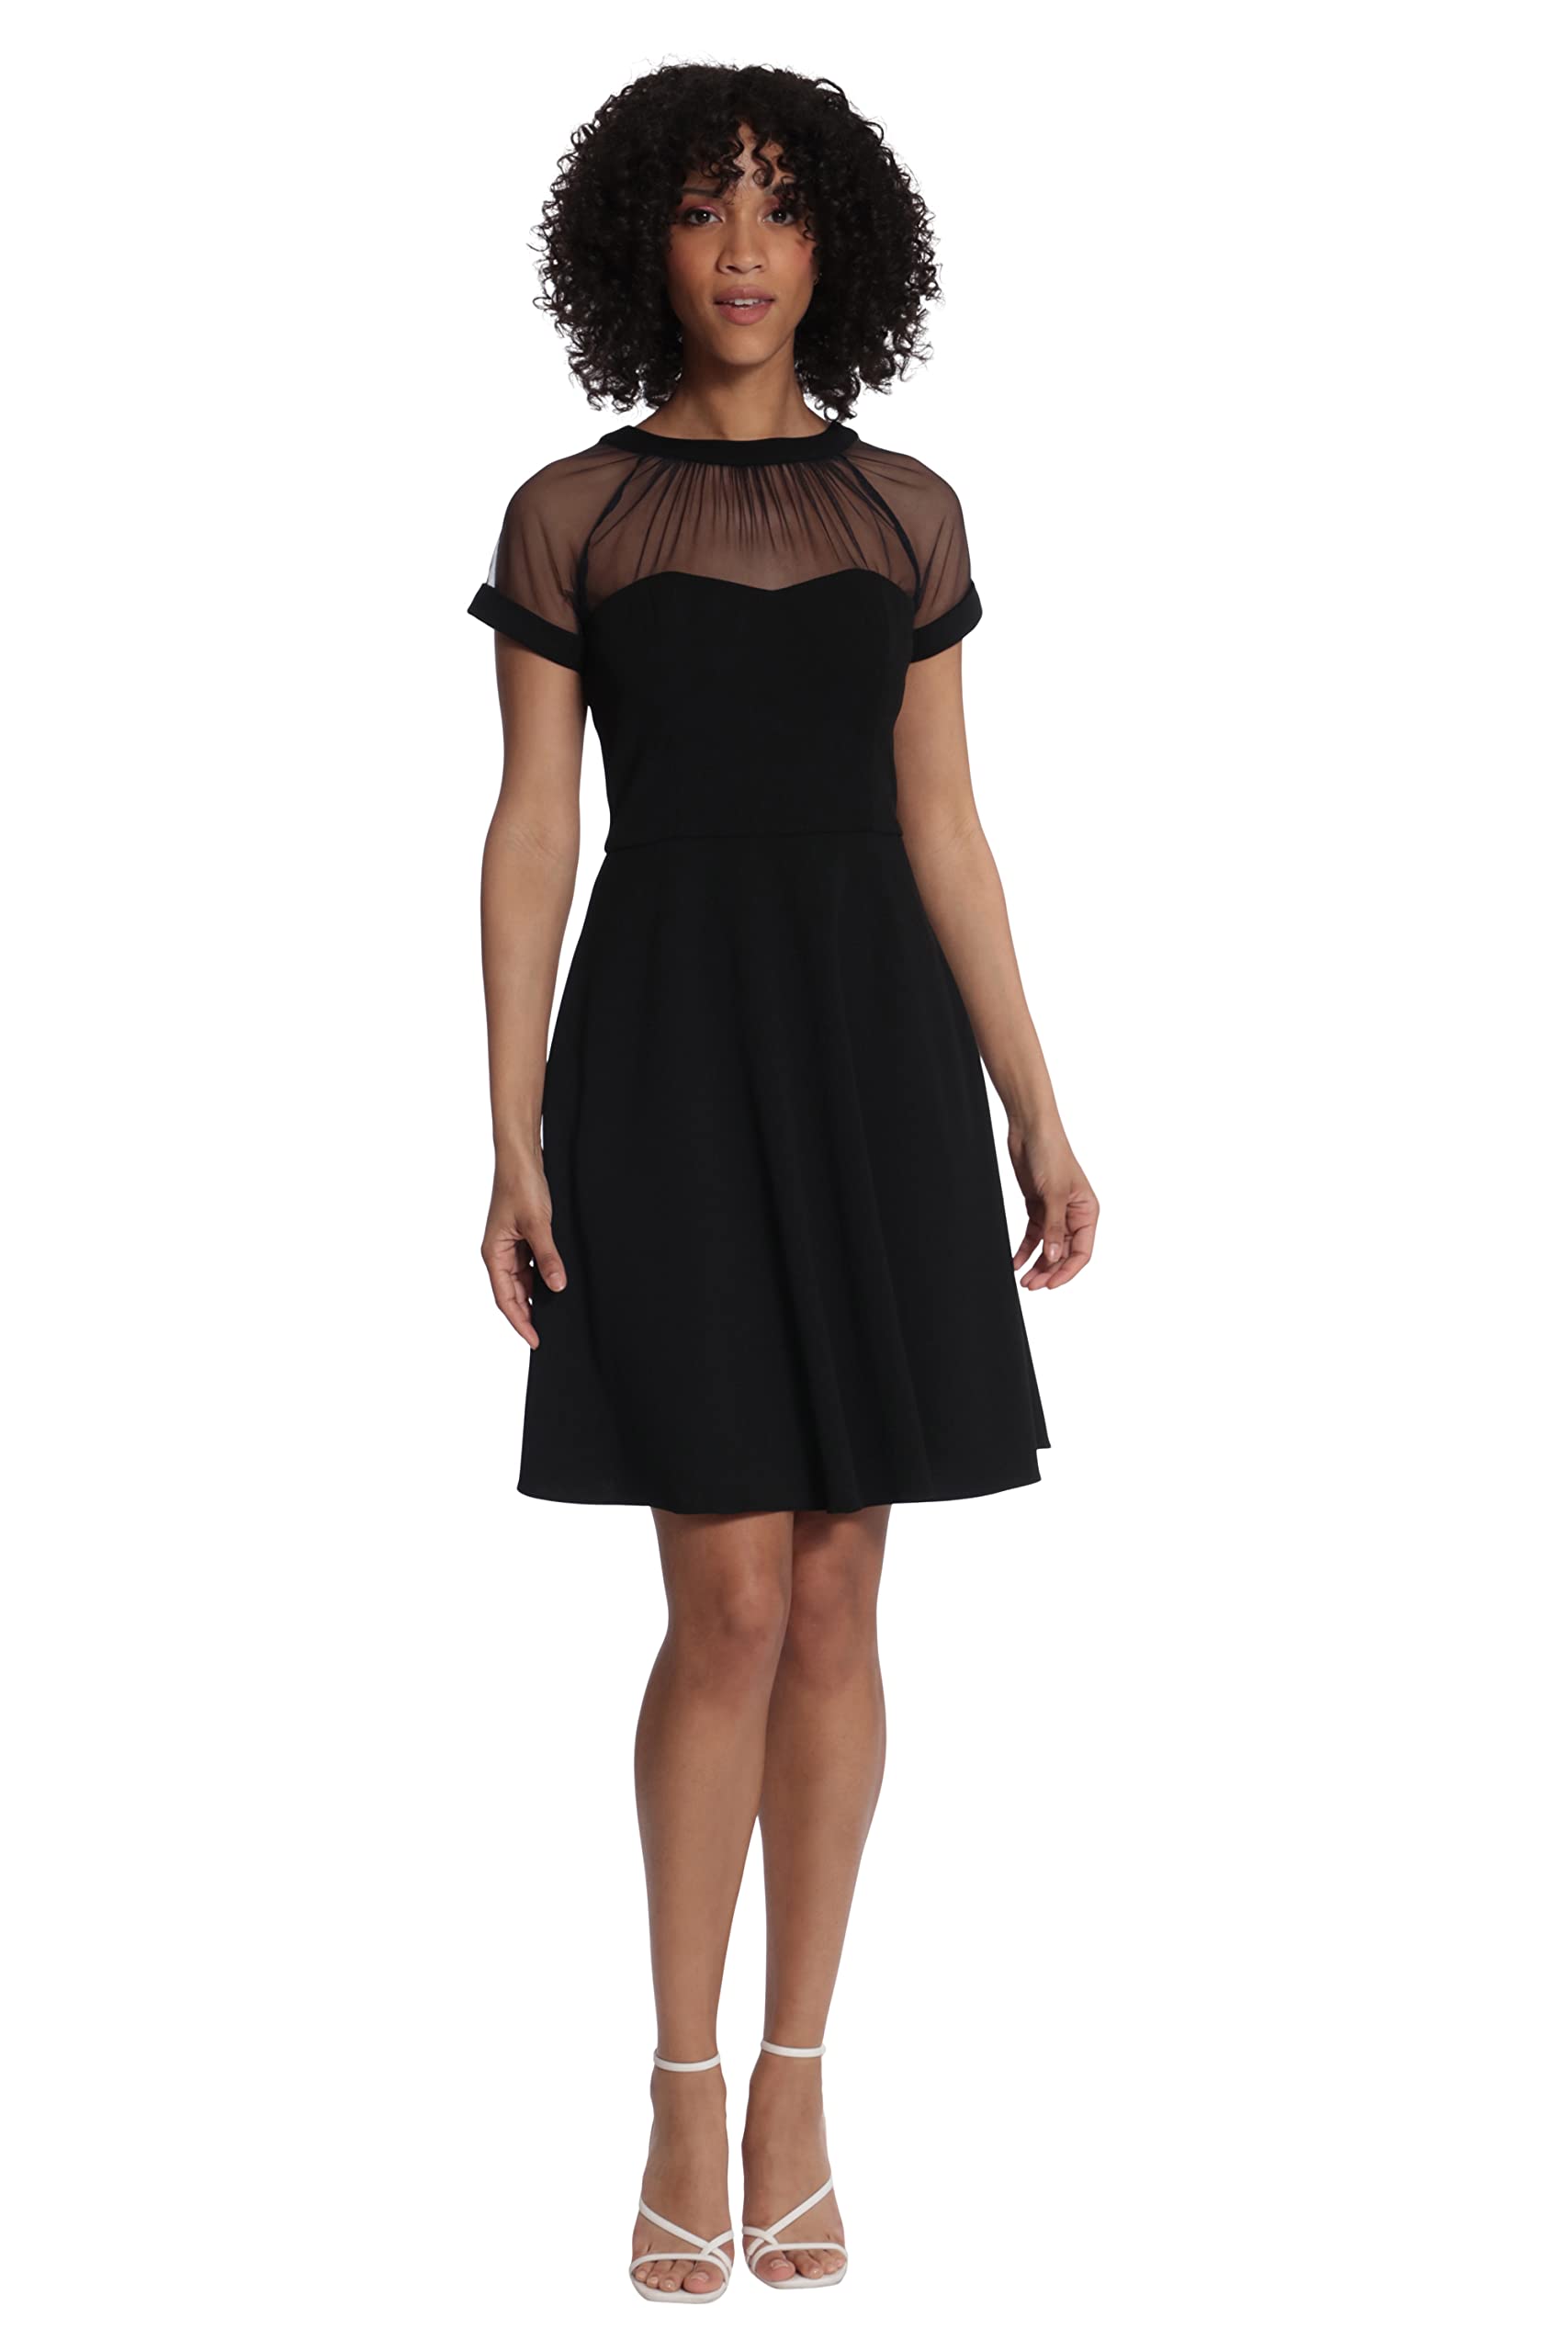 Maggy London Women's Illusion Dress Occasion Event Party Holiday Cocktail Guest of Wedding